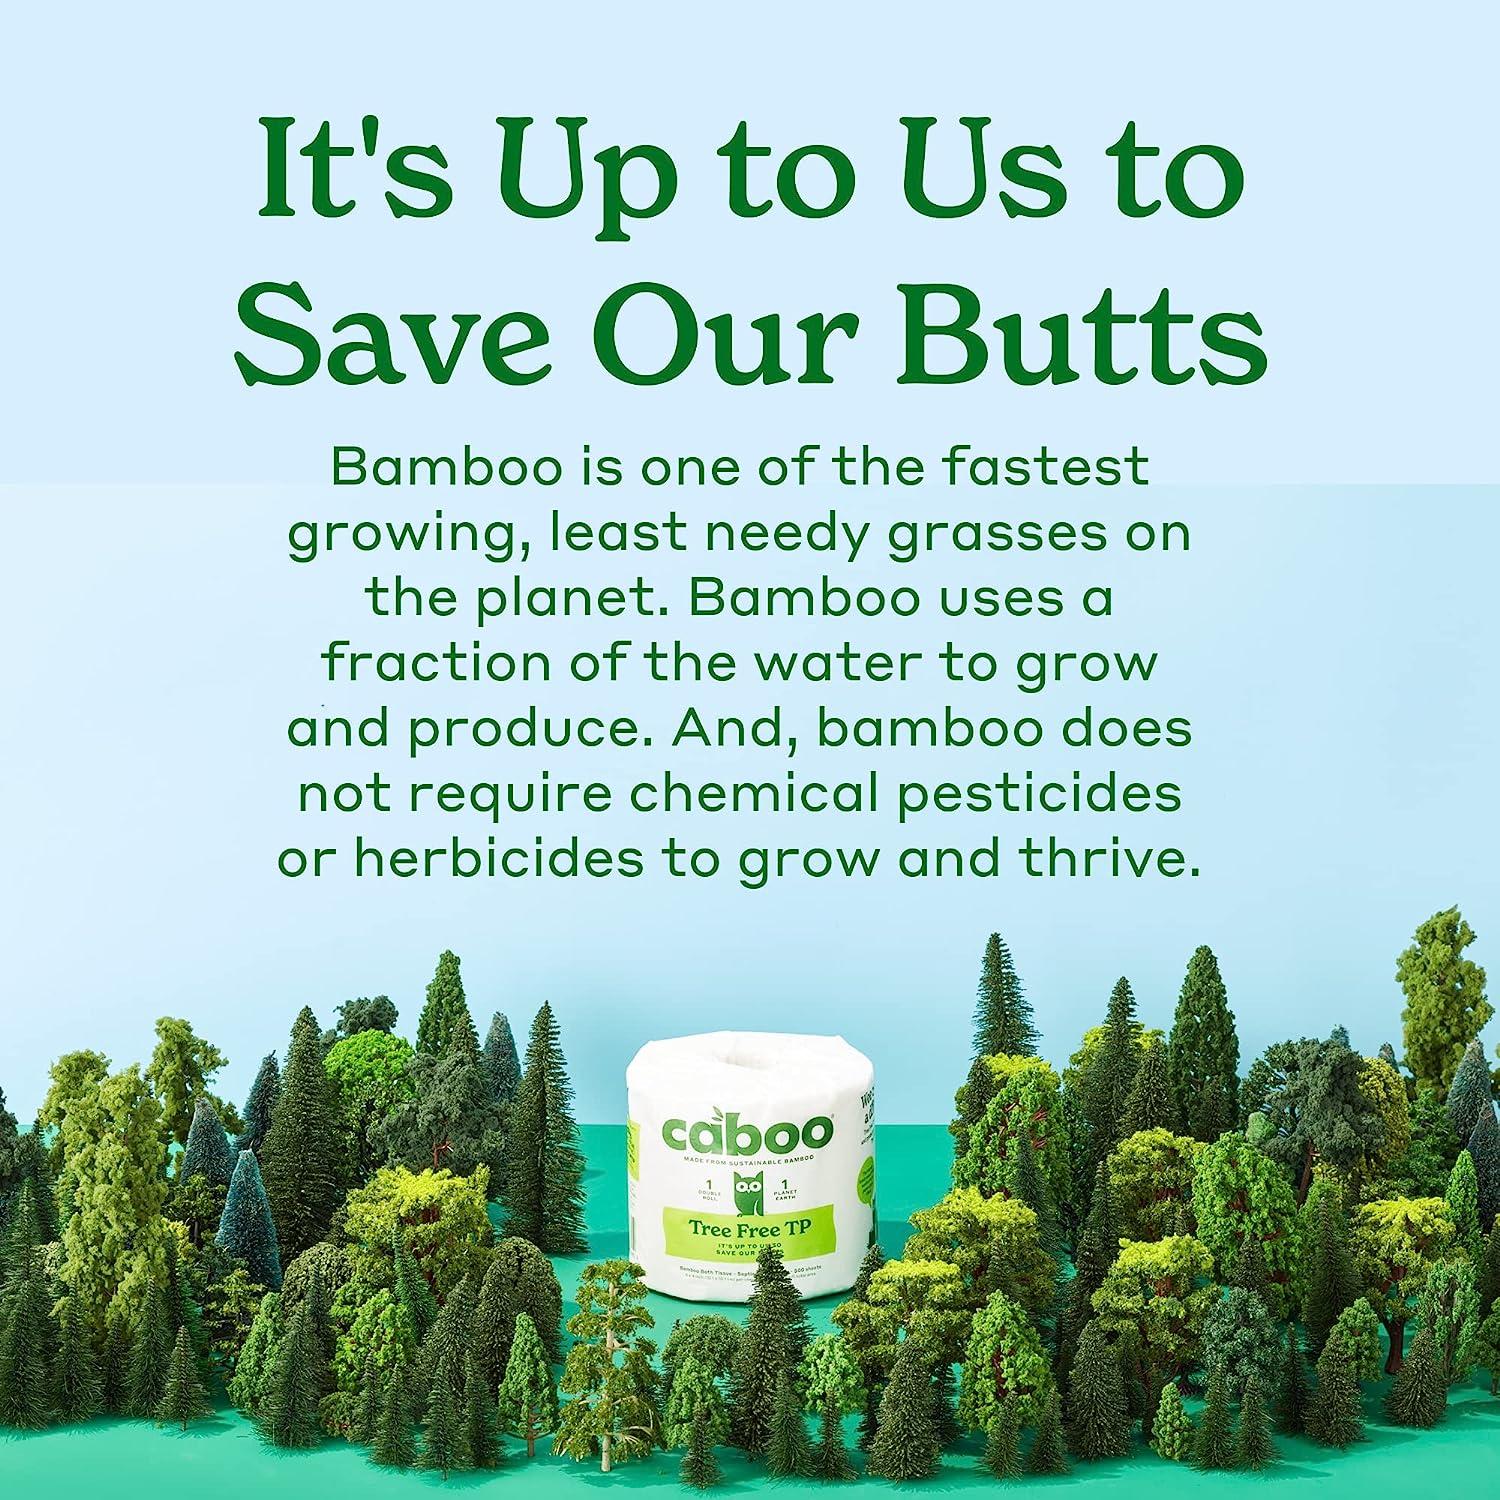 Tree Free Facial Tissues - Eco-Friendly, Sustainable